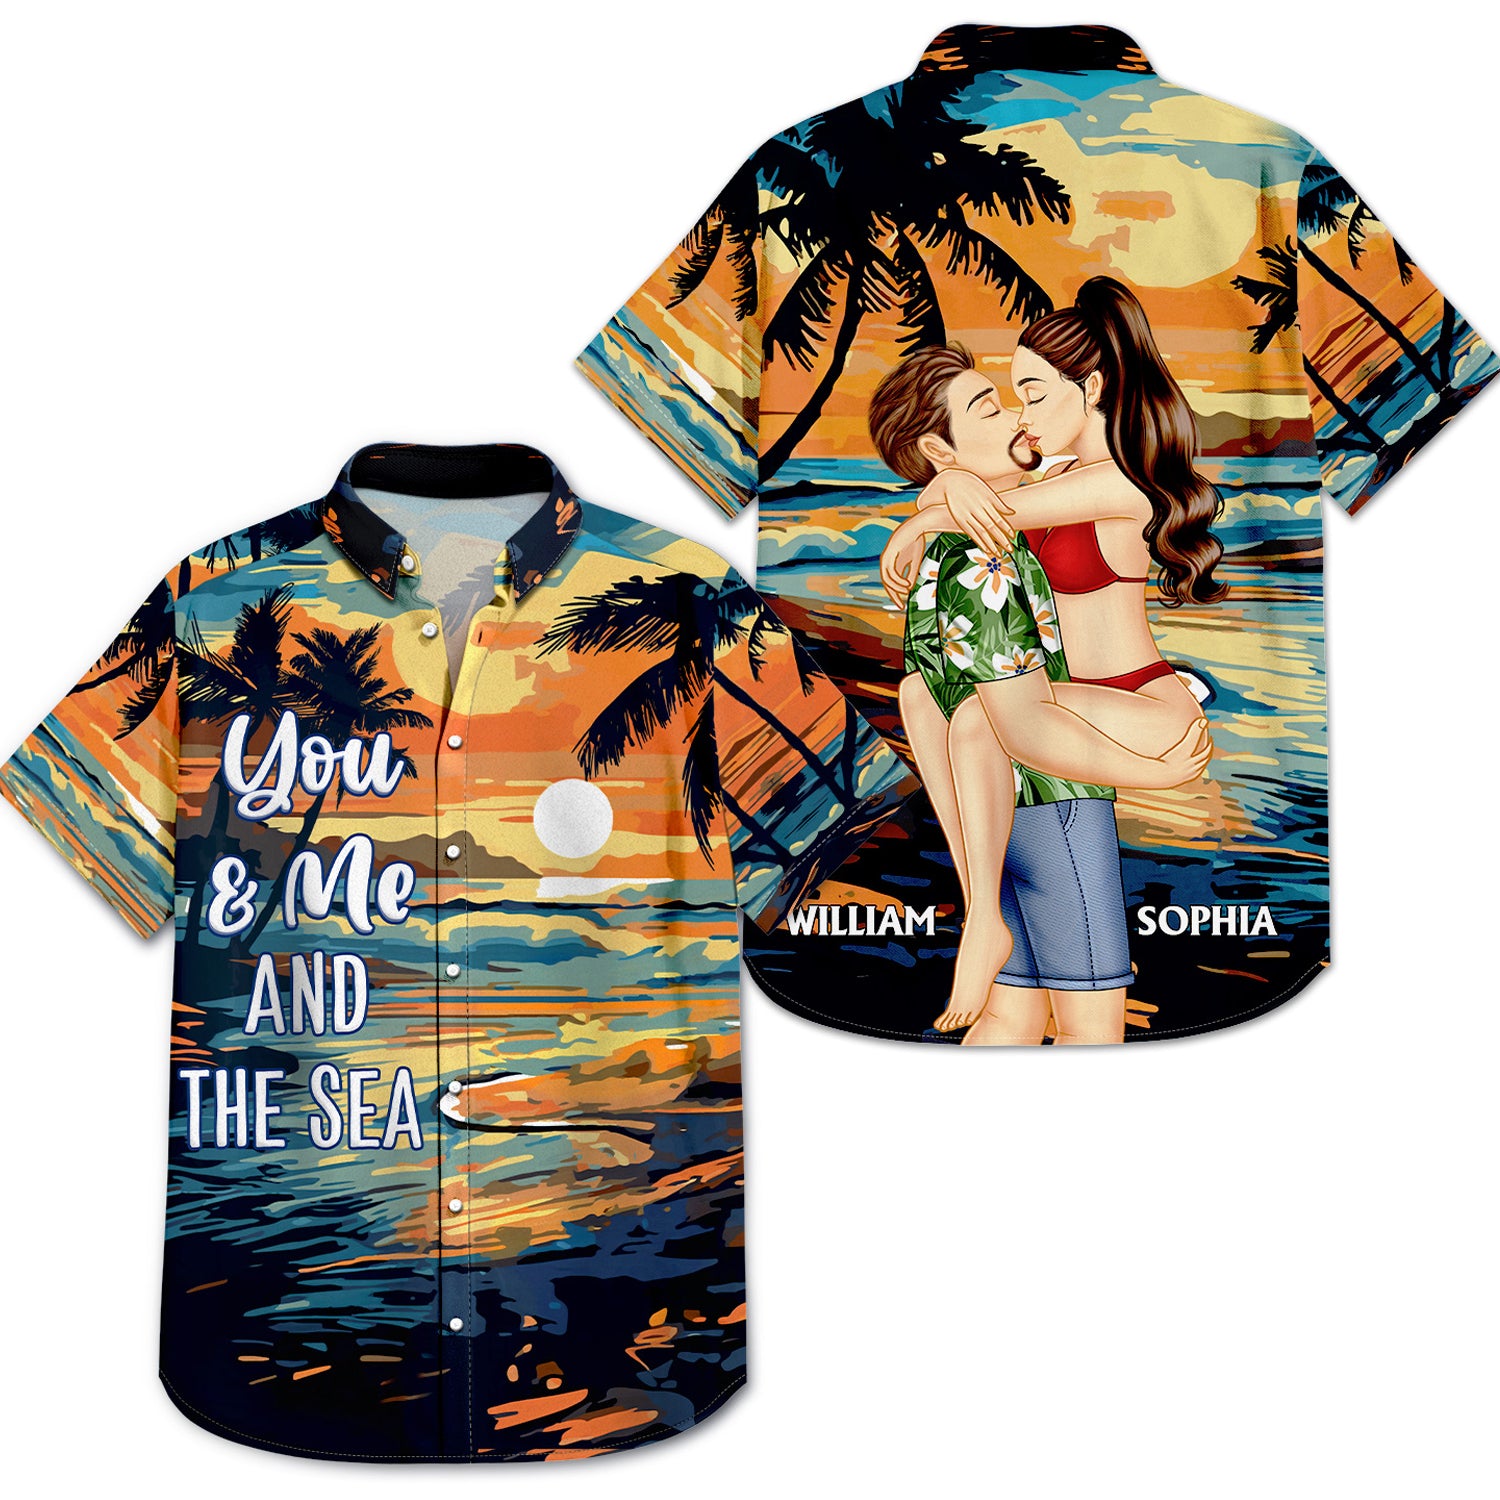 You And Me And The Sea - Birthday, Loving, Anniversary, Vacation, Travel Gift For Spouse, Husband, Wife, Couple, Boyfriend, Girlfriend - Personalized Hawaiian Shirt